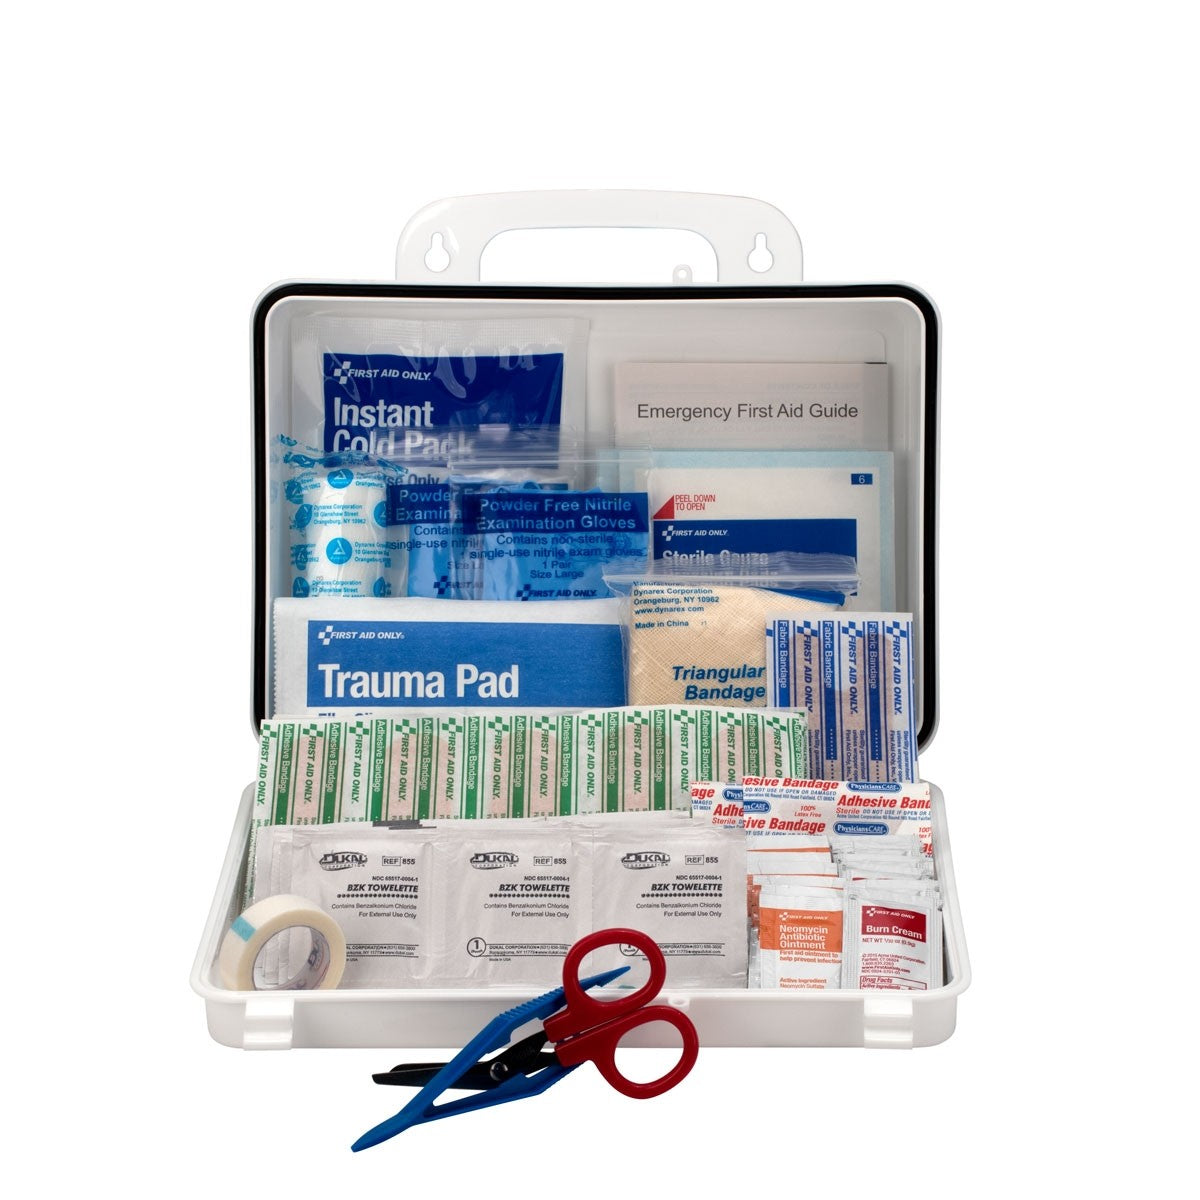 25 Person Contractor First Aid Kit, Plastic Case - W-9301-25P